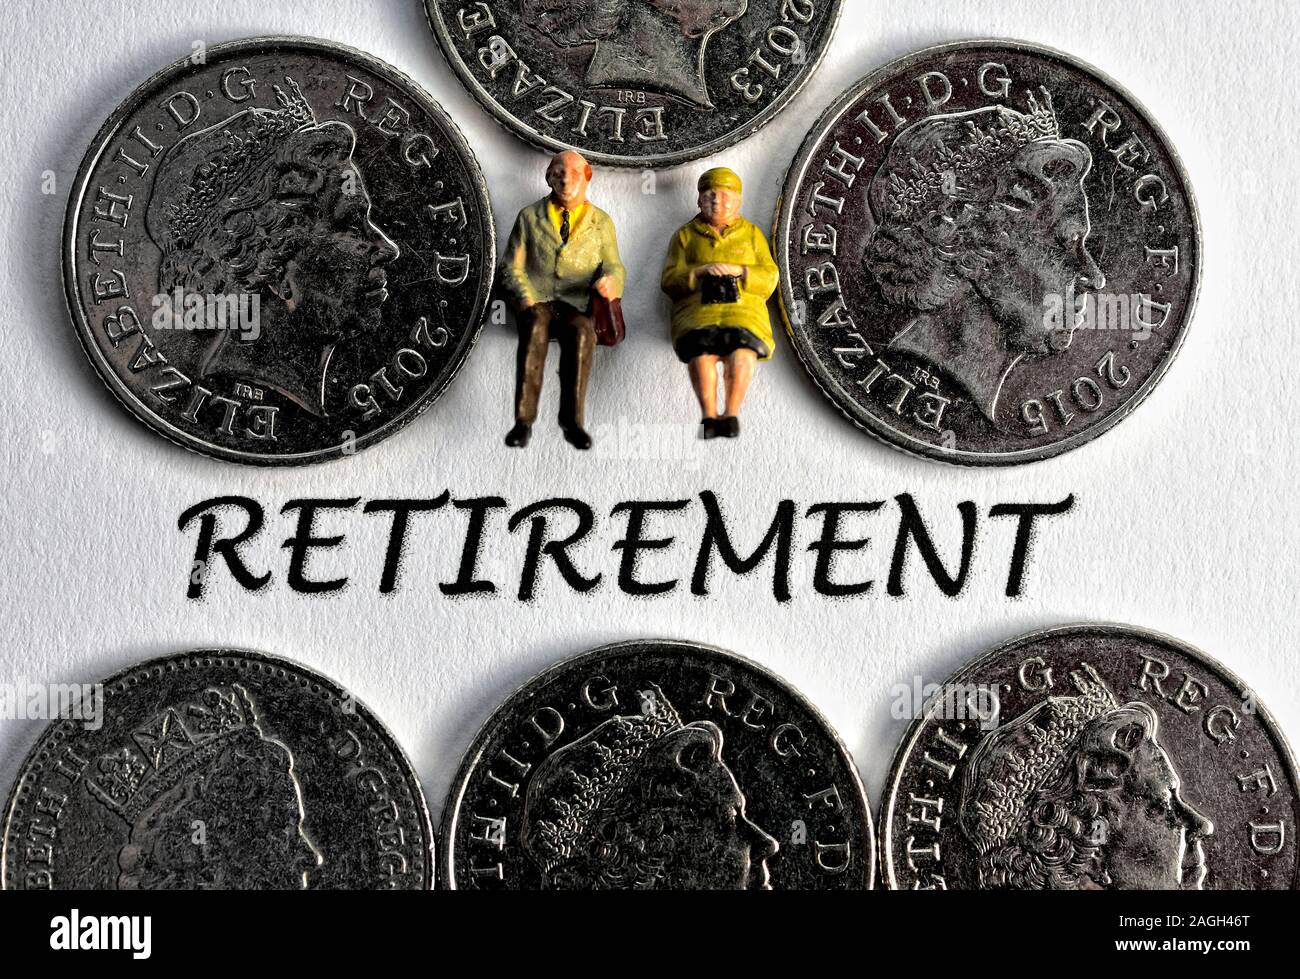 Two pensioners miniature figurines sitting above the word Retirement Stock Photo